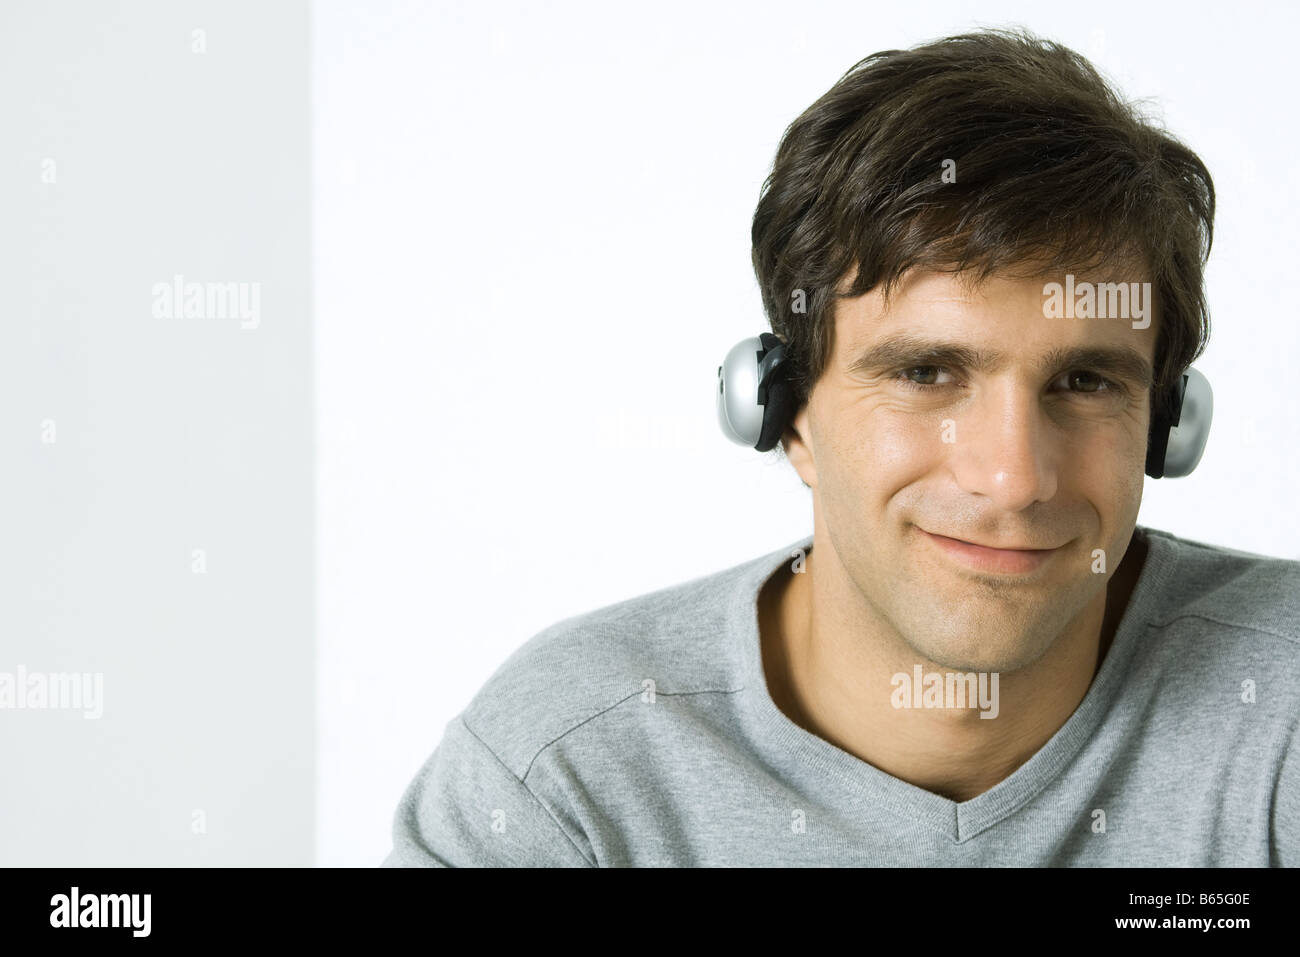 Man listening to headphones, smiling at camera Banque D'Images